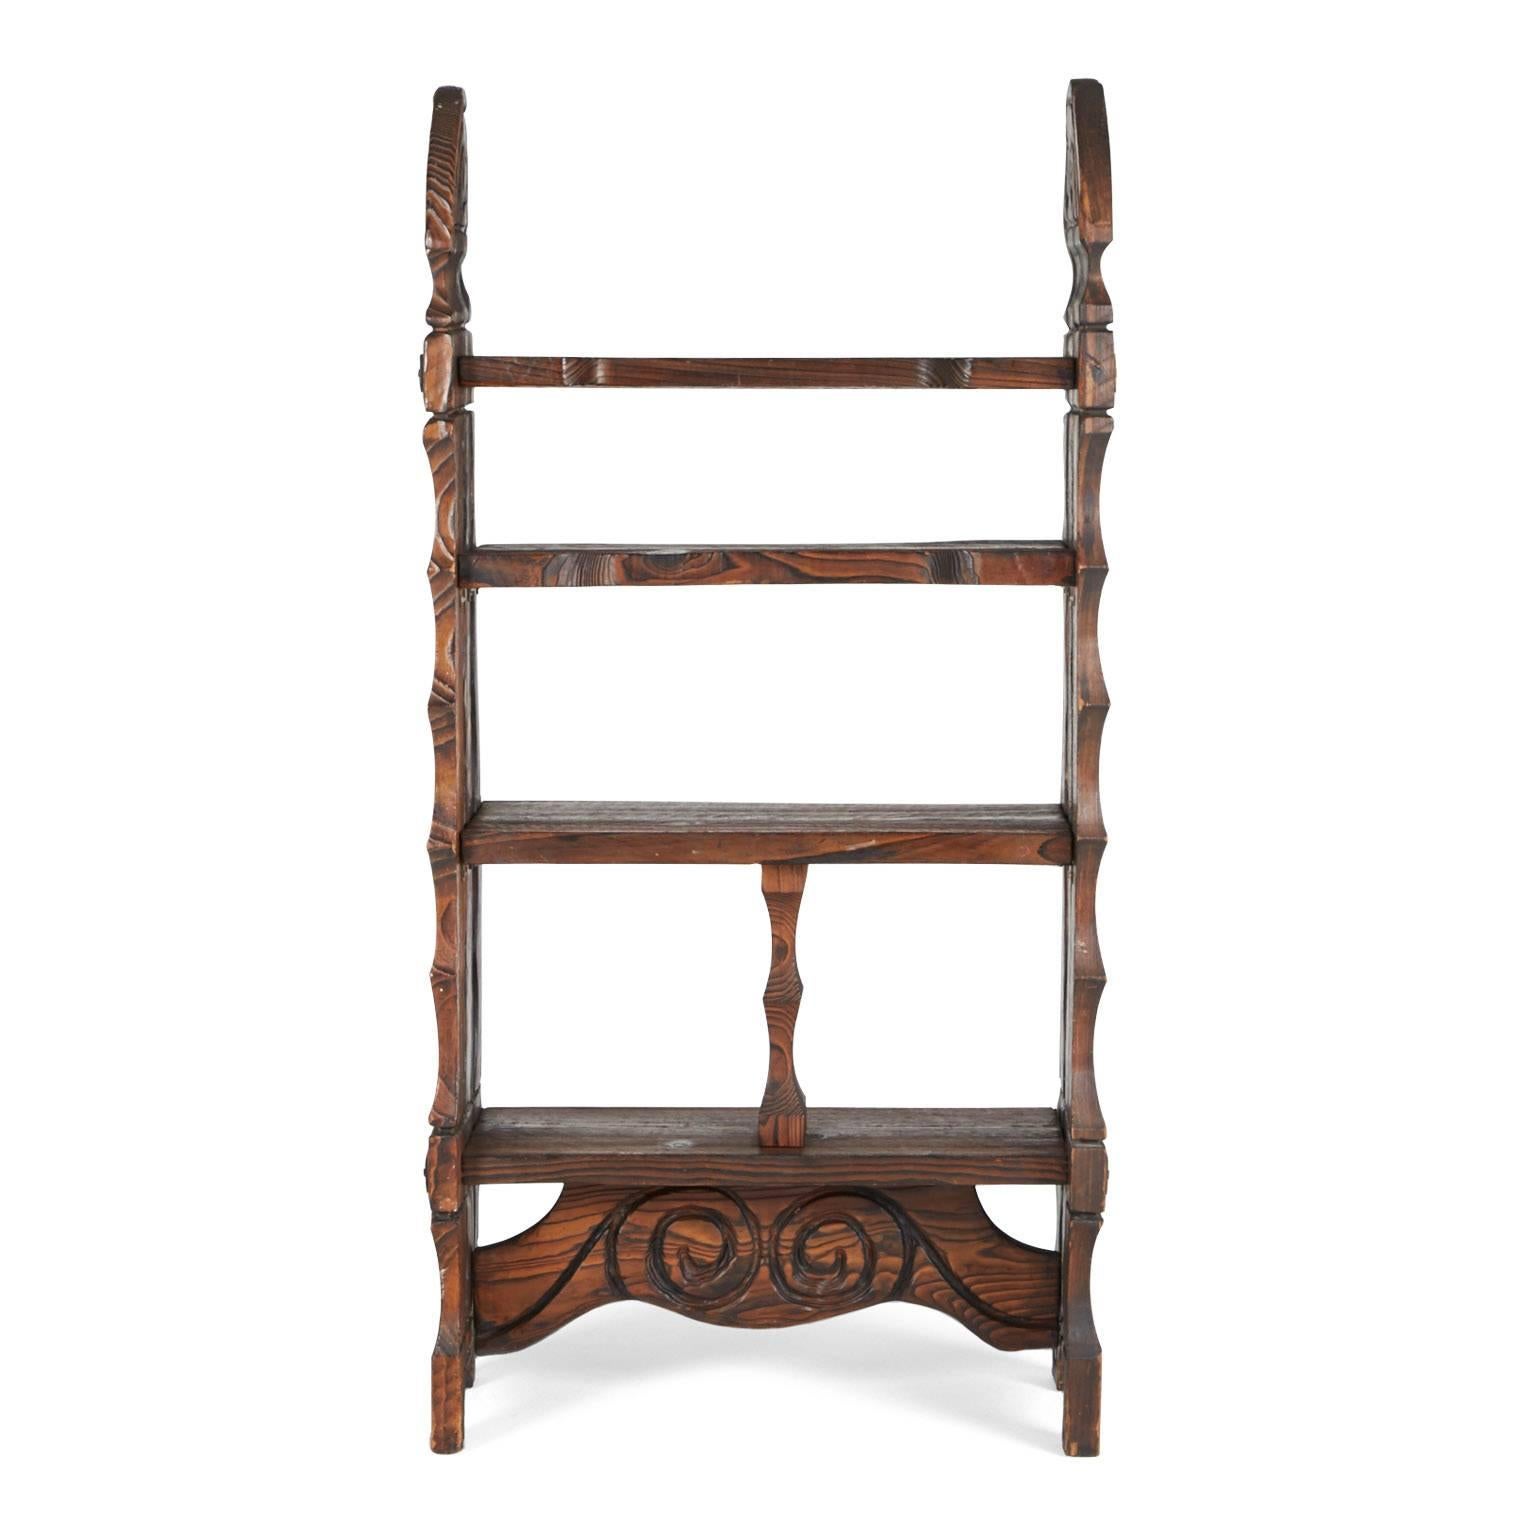 This ornately crafted red walnut étagère with carved exotic details is a testament to William Westenhaver's Modern Primitive creations. Influenced by Polynesian natives sculpting their ancestral deities in to wood furnishings, westenhaver fused his